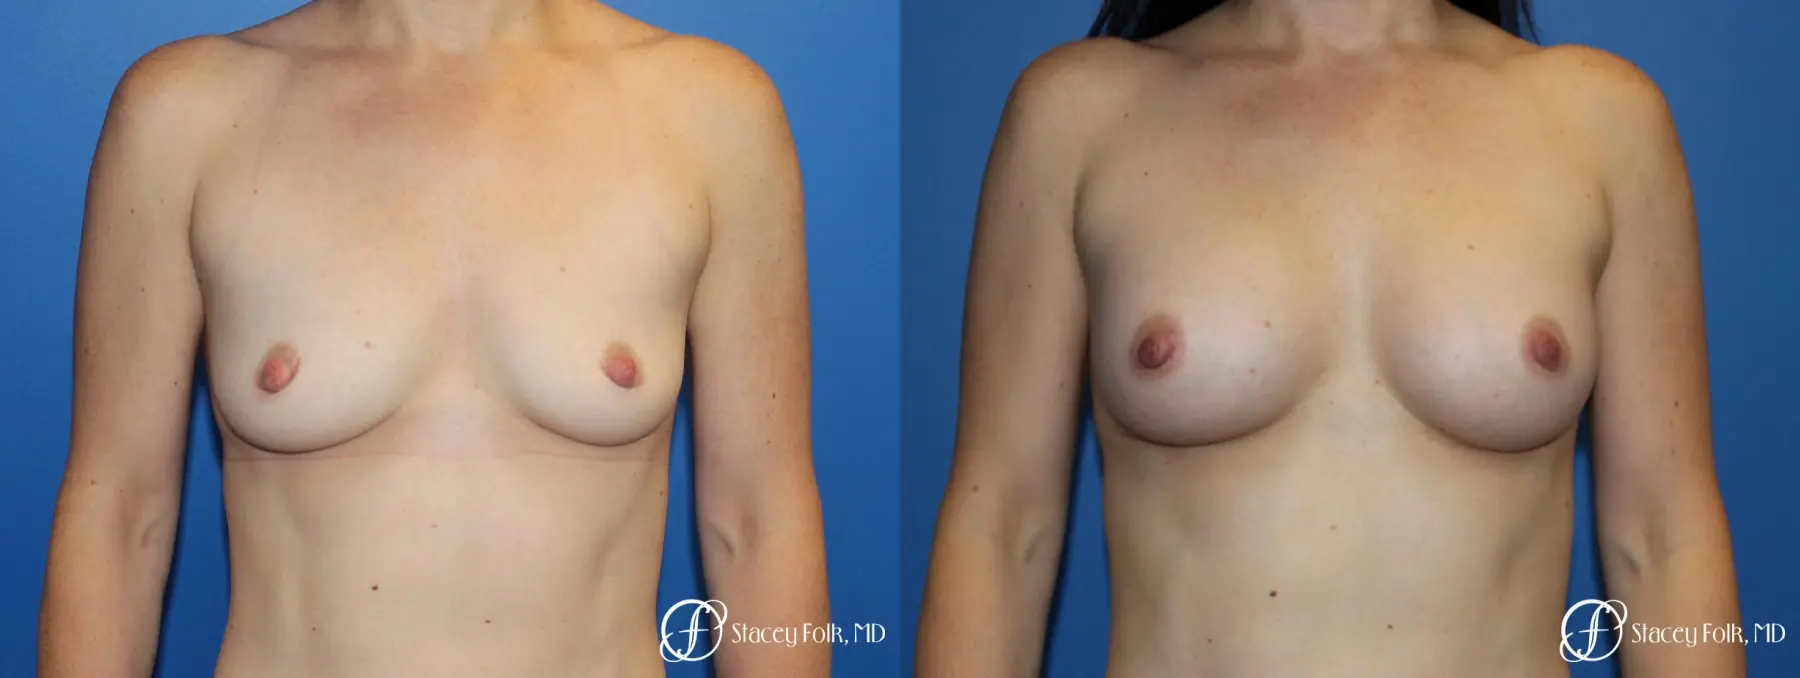 Breast augmentation with Natrelle Inspira breast implants - Before and After 1